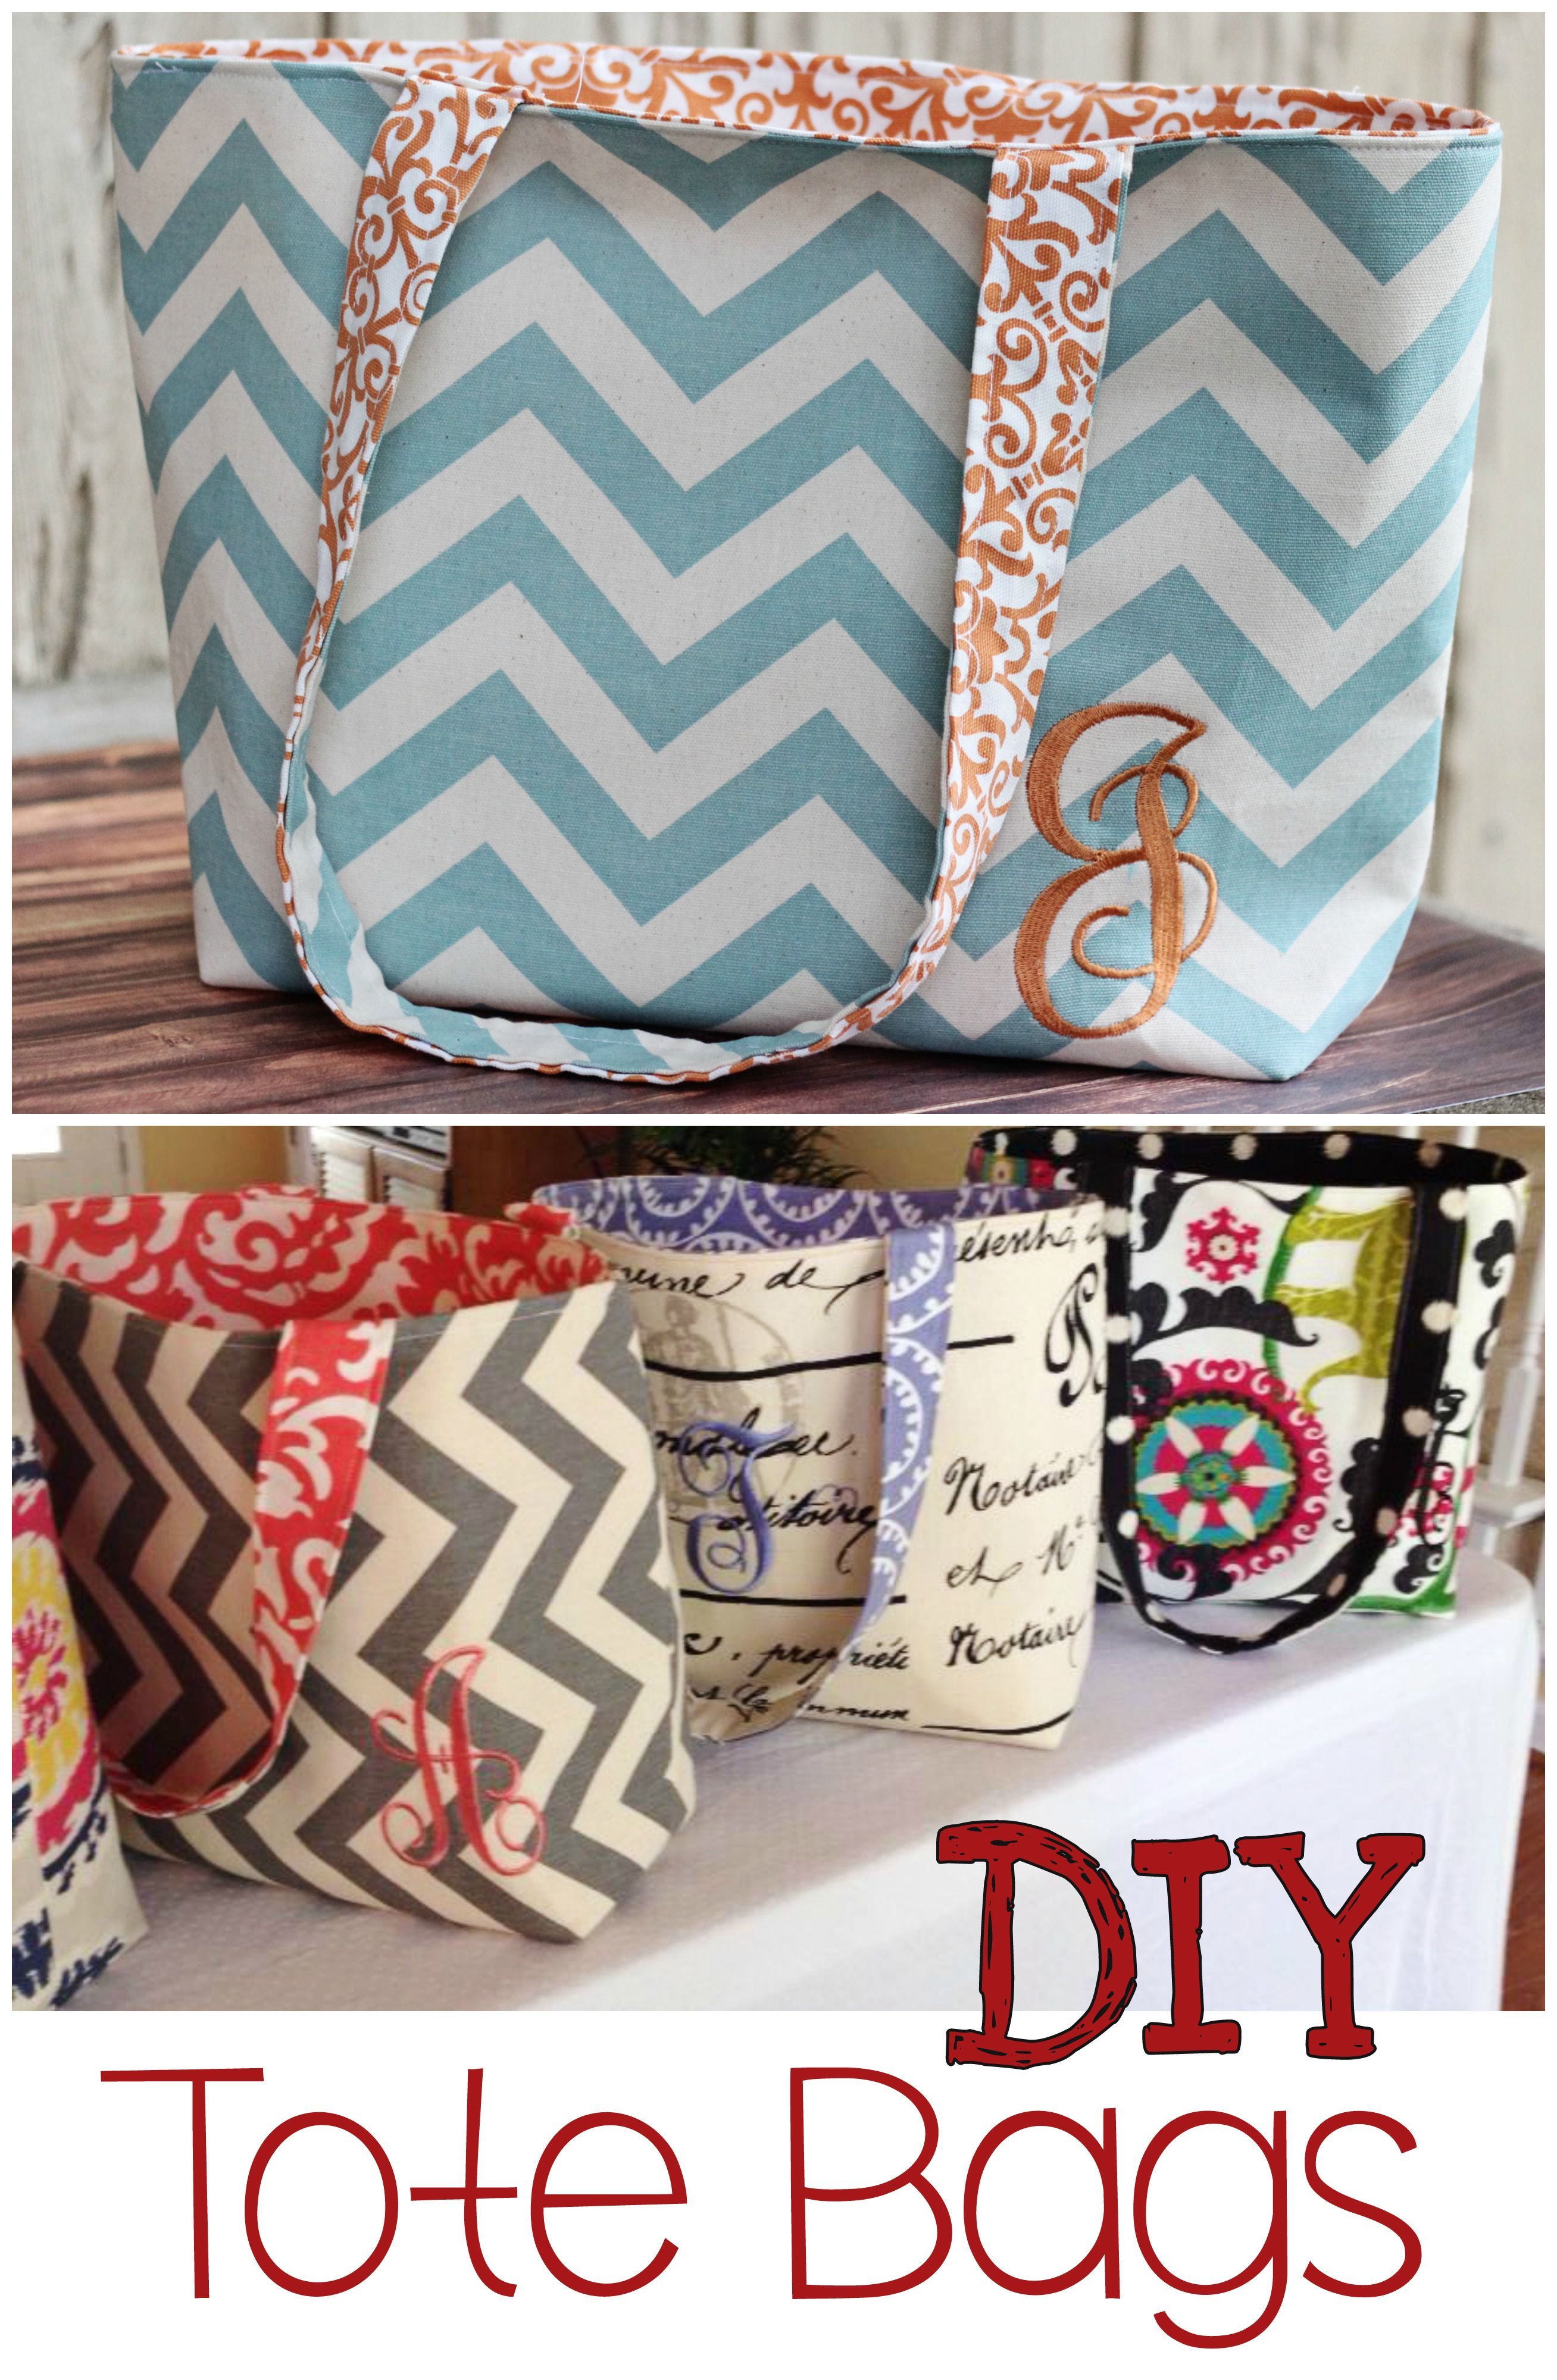 This DIY tote is easy-sew and makes a great beginner sewing project yet its elegant enough for advanced sewers to appreciate it.